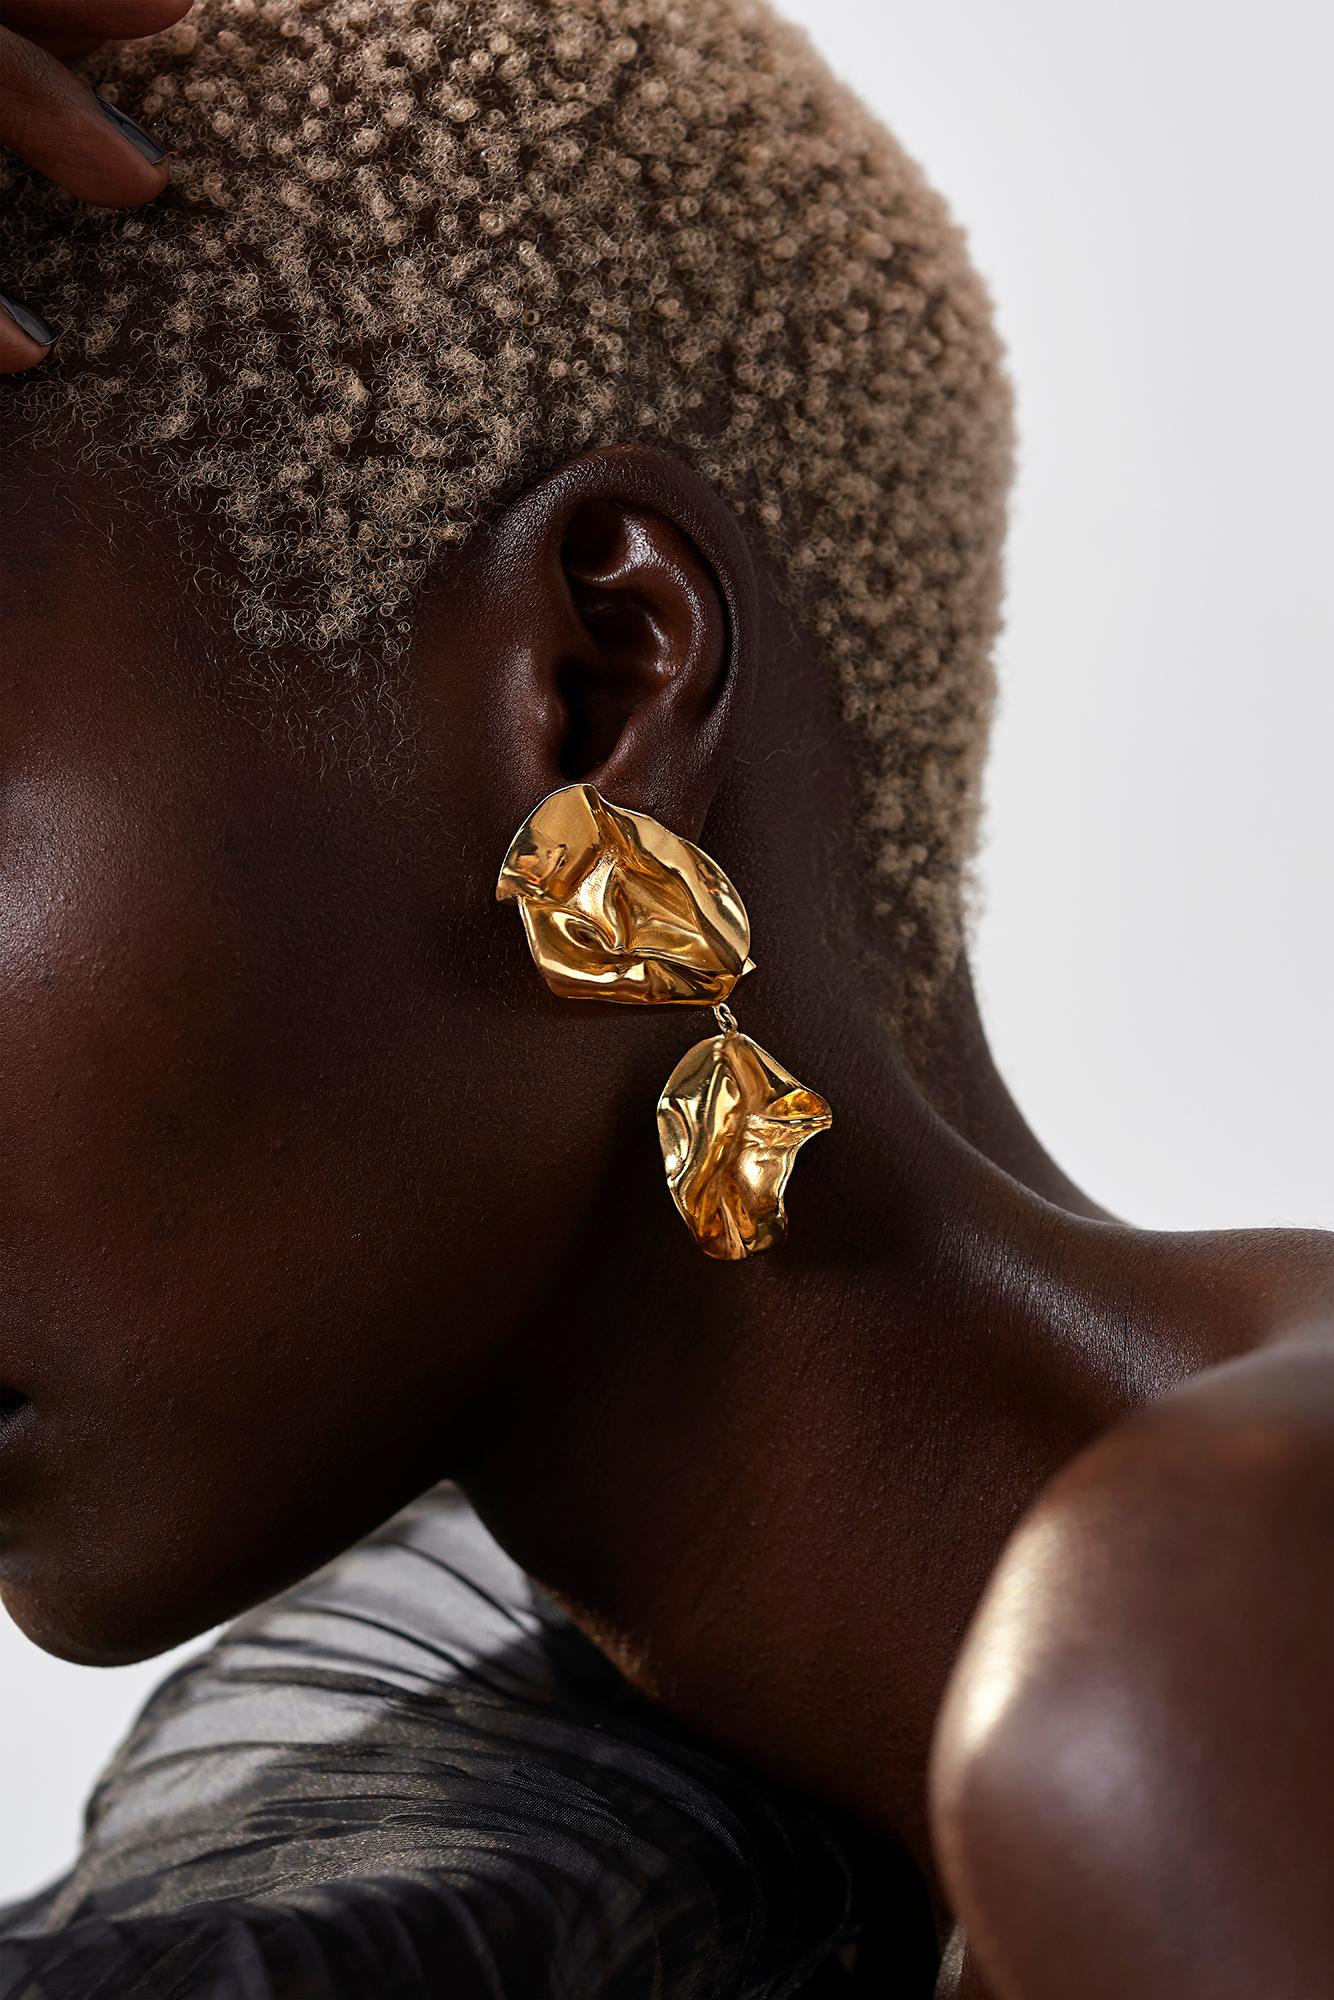 The Fold Earrings are sculptural folded earrings that have been molded by hand. Their intricate folds are highlighted by the high-polished Mirror Finish. Wear them day or night with your hair tucked back to let them shine. 18k gold plated brass.